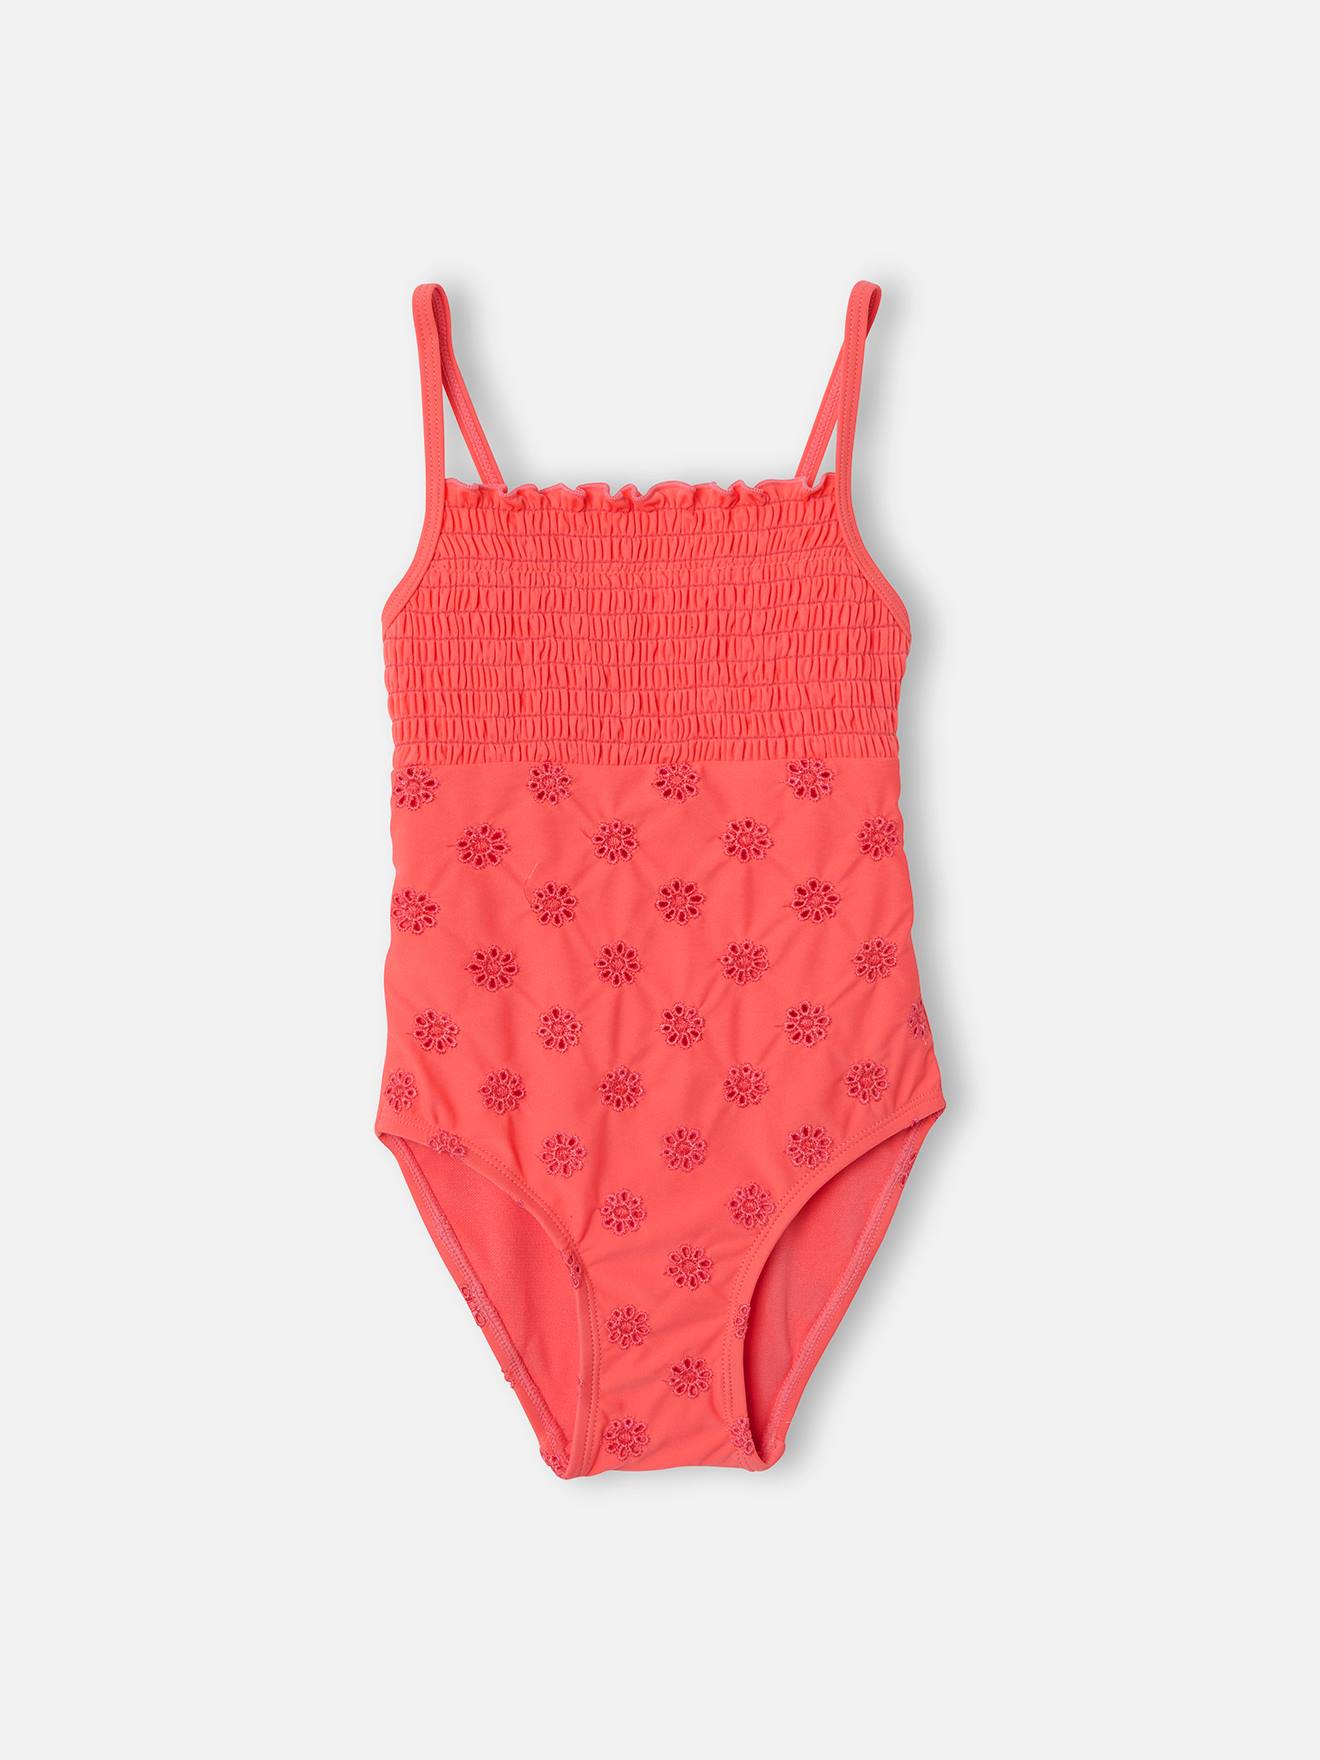 Swimsuit with Broderie Anglaise for Girls - orange medium solid, Girls